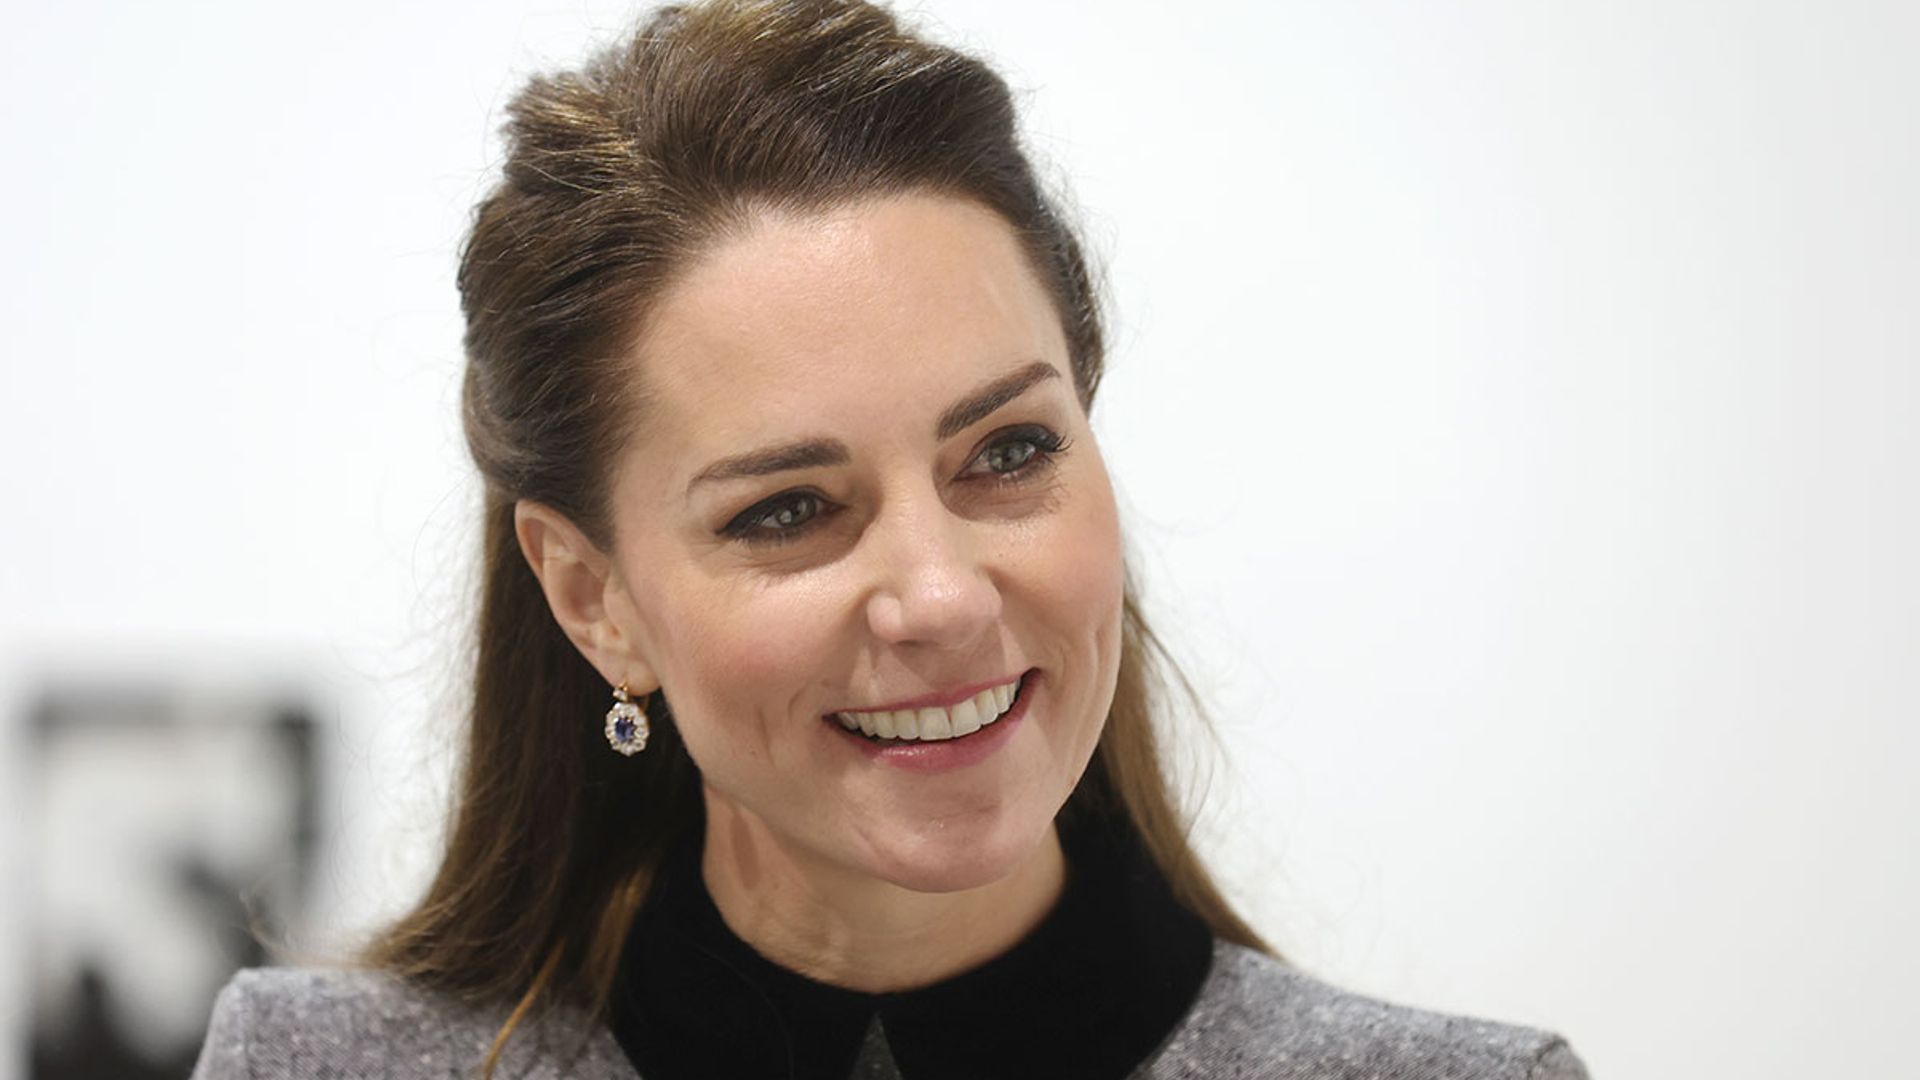 Kate Middleton borrows her children's LEGO toys for special video - watch